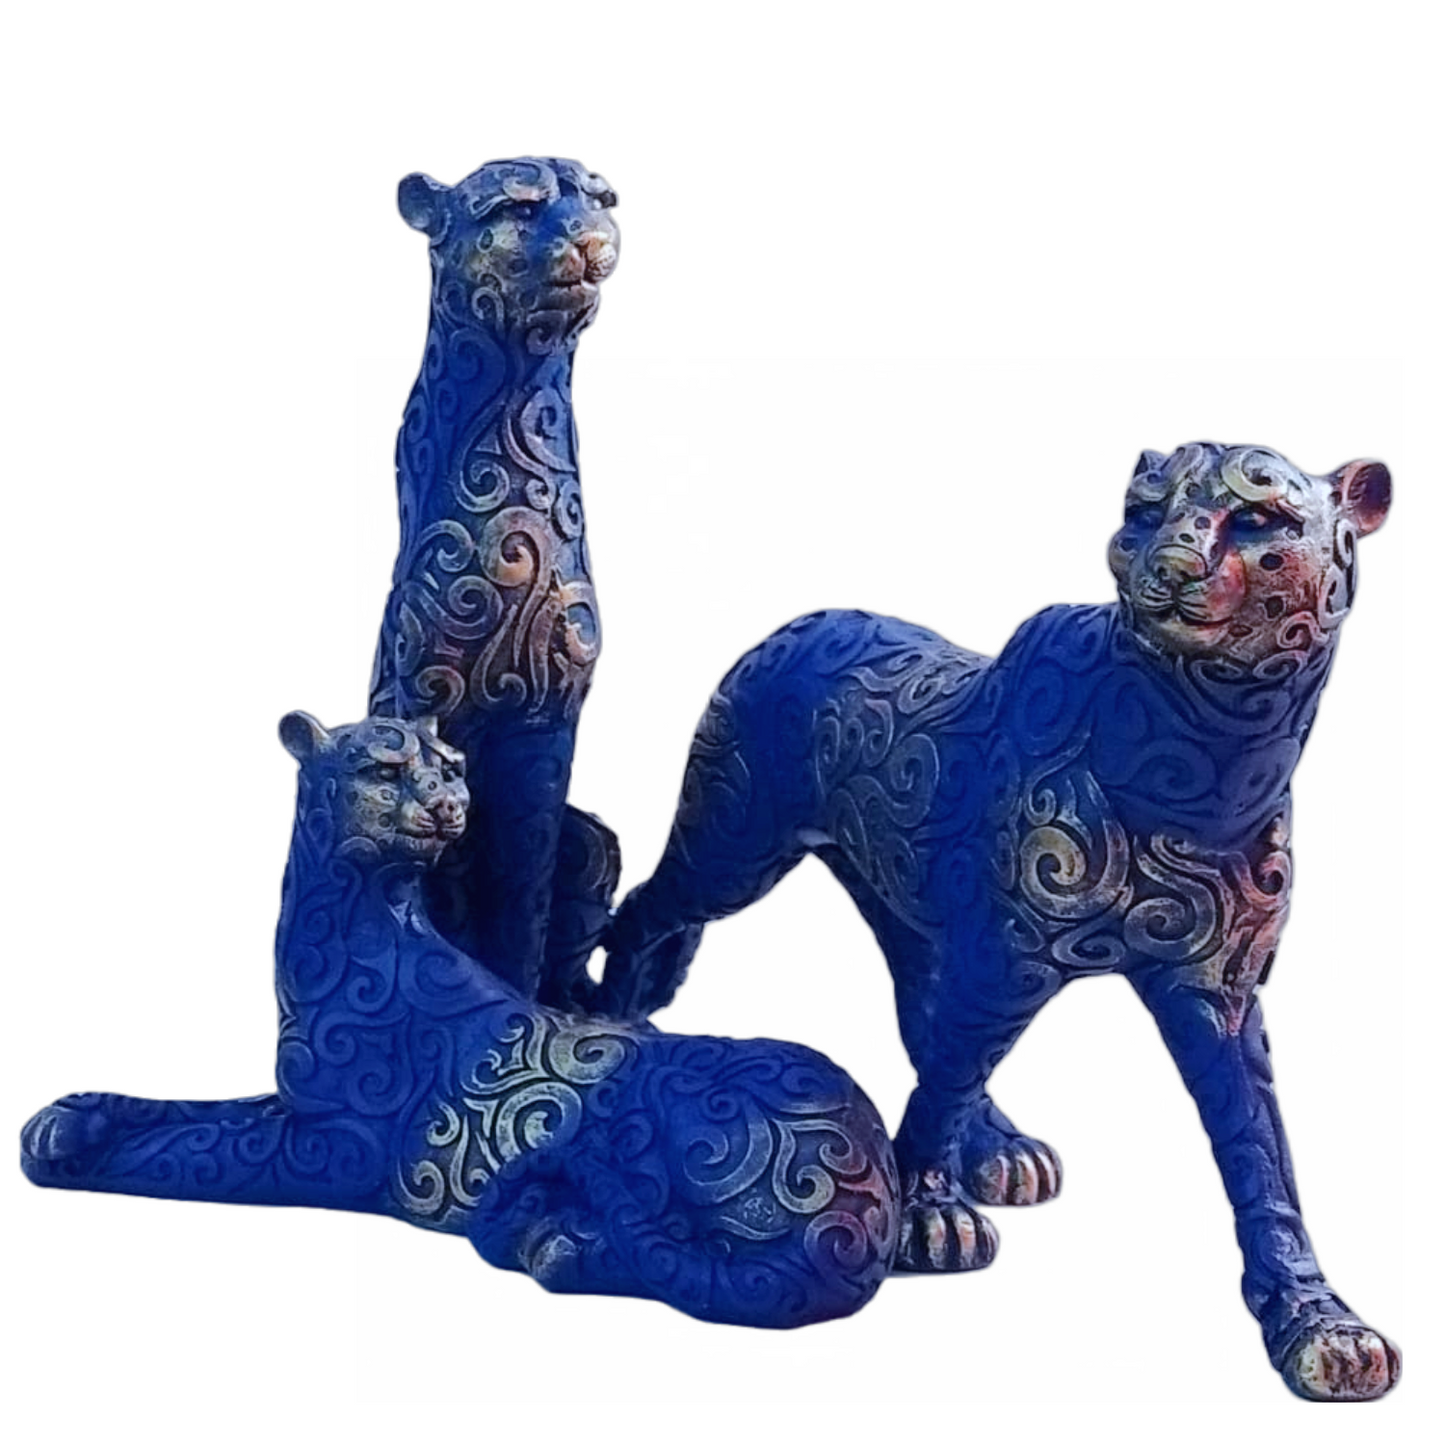 Statue ALiLA Leopard Statue Showpiece Idol for Gifting & Home Living Room Desk Office Table Decoration, Blue & Silver, Set of 3 Statue